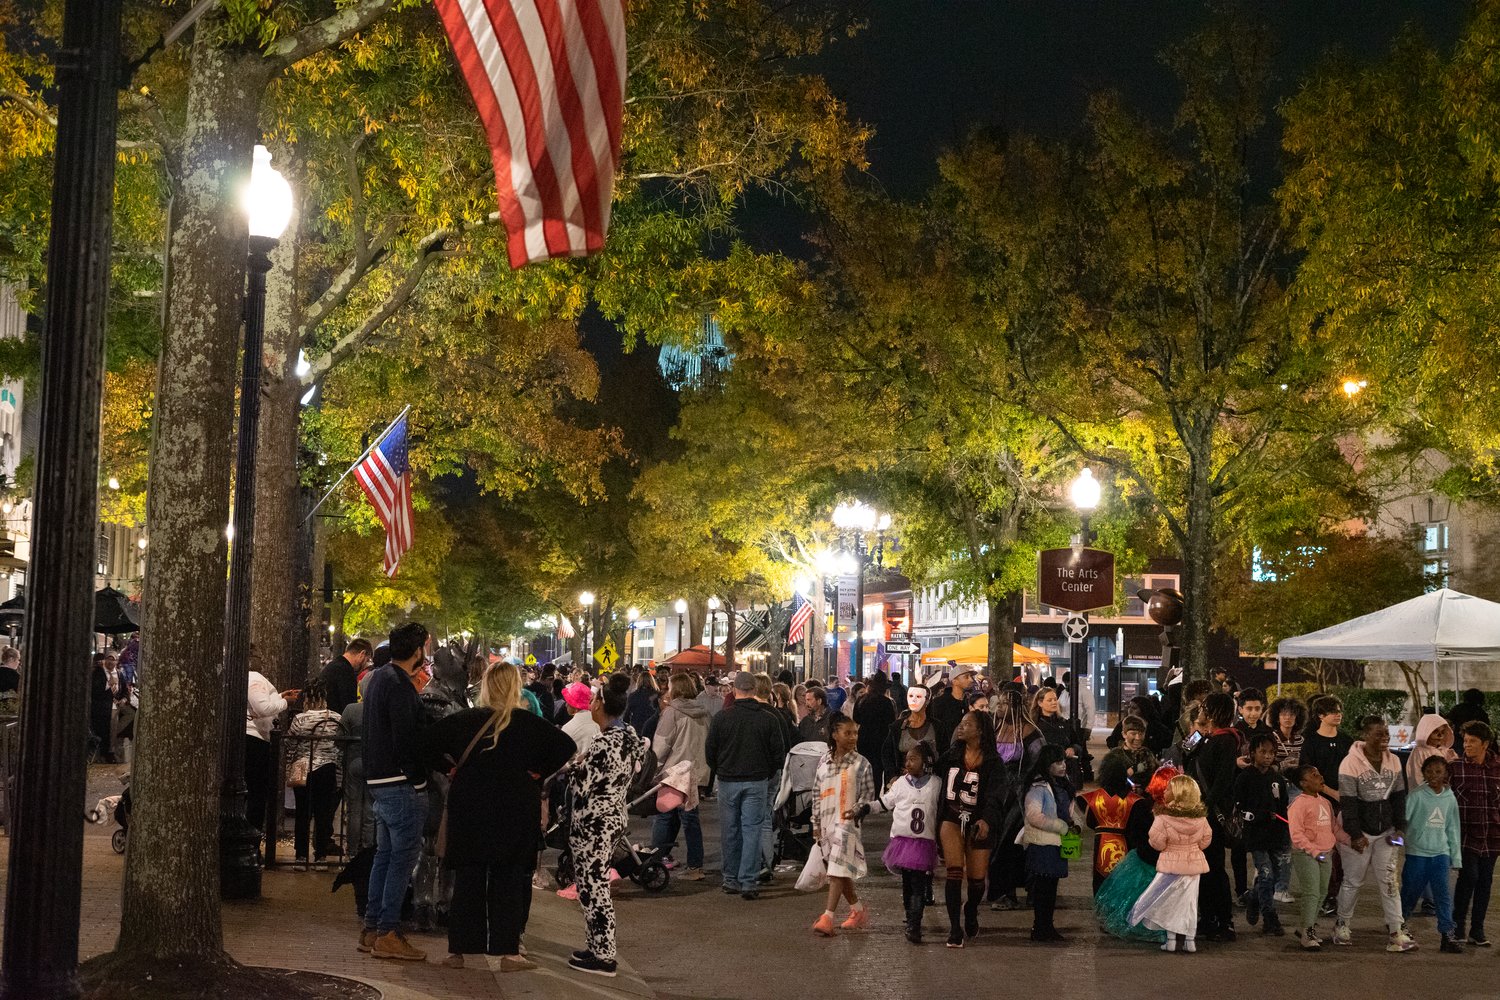 The Cool Spring Downtown District hosted its 4th Friday Zombie Walk and Prom in downtown Fayetteville on Oct. 28.